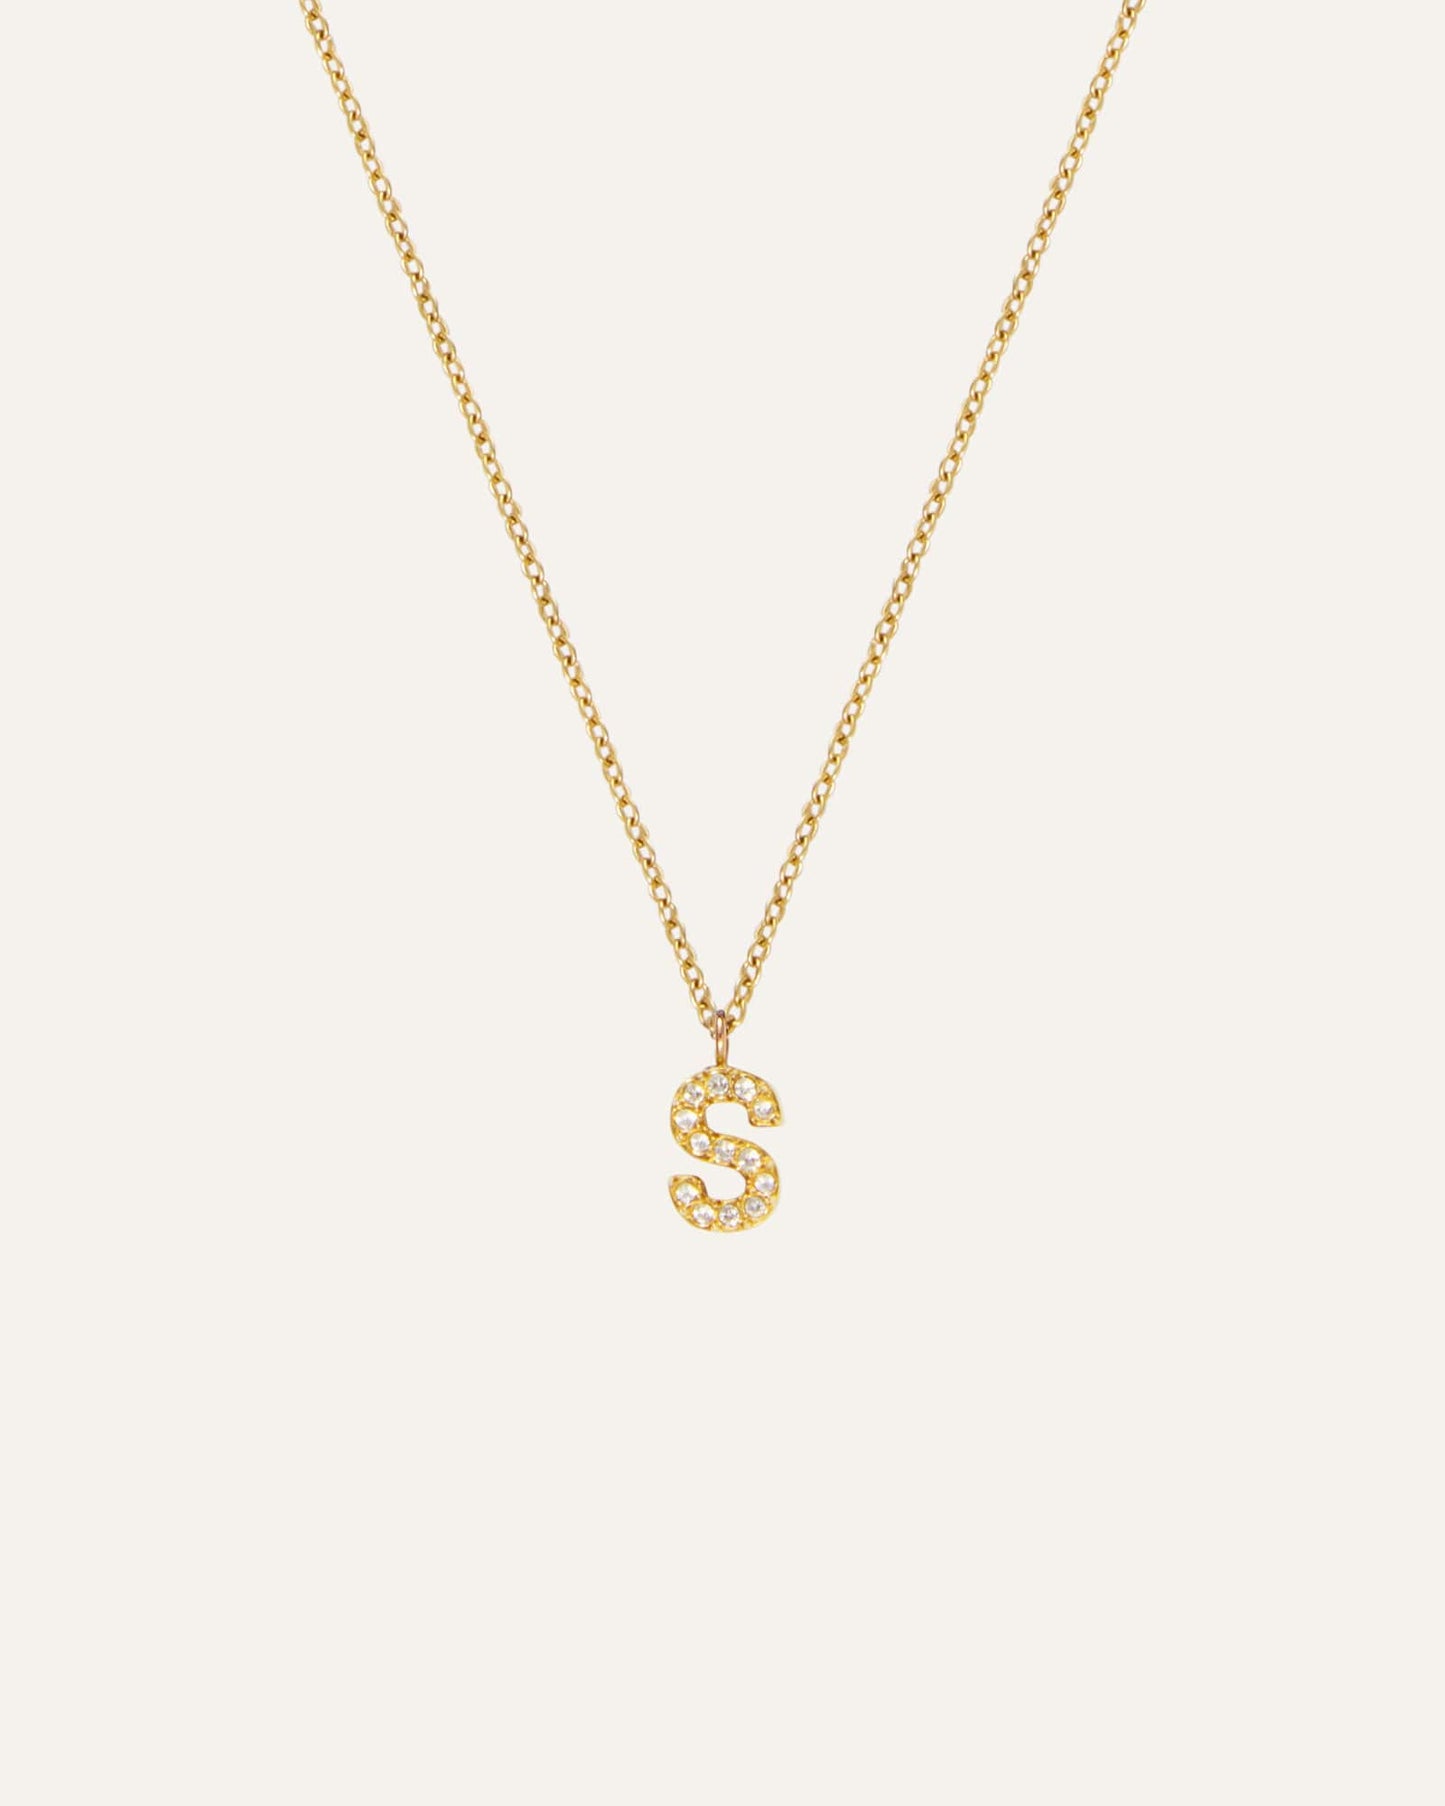 Petite Stone Letter Gold Necklace